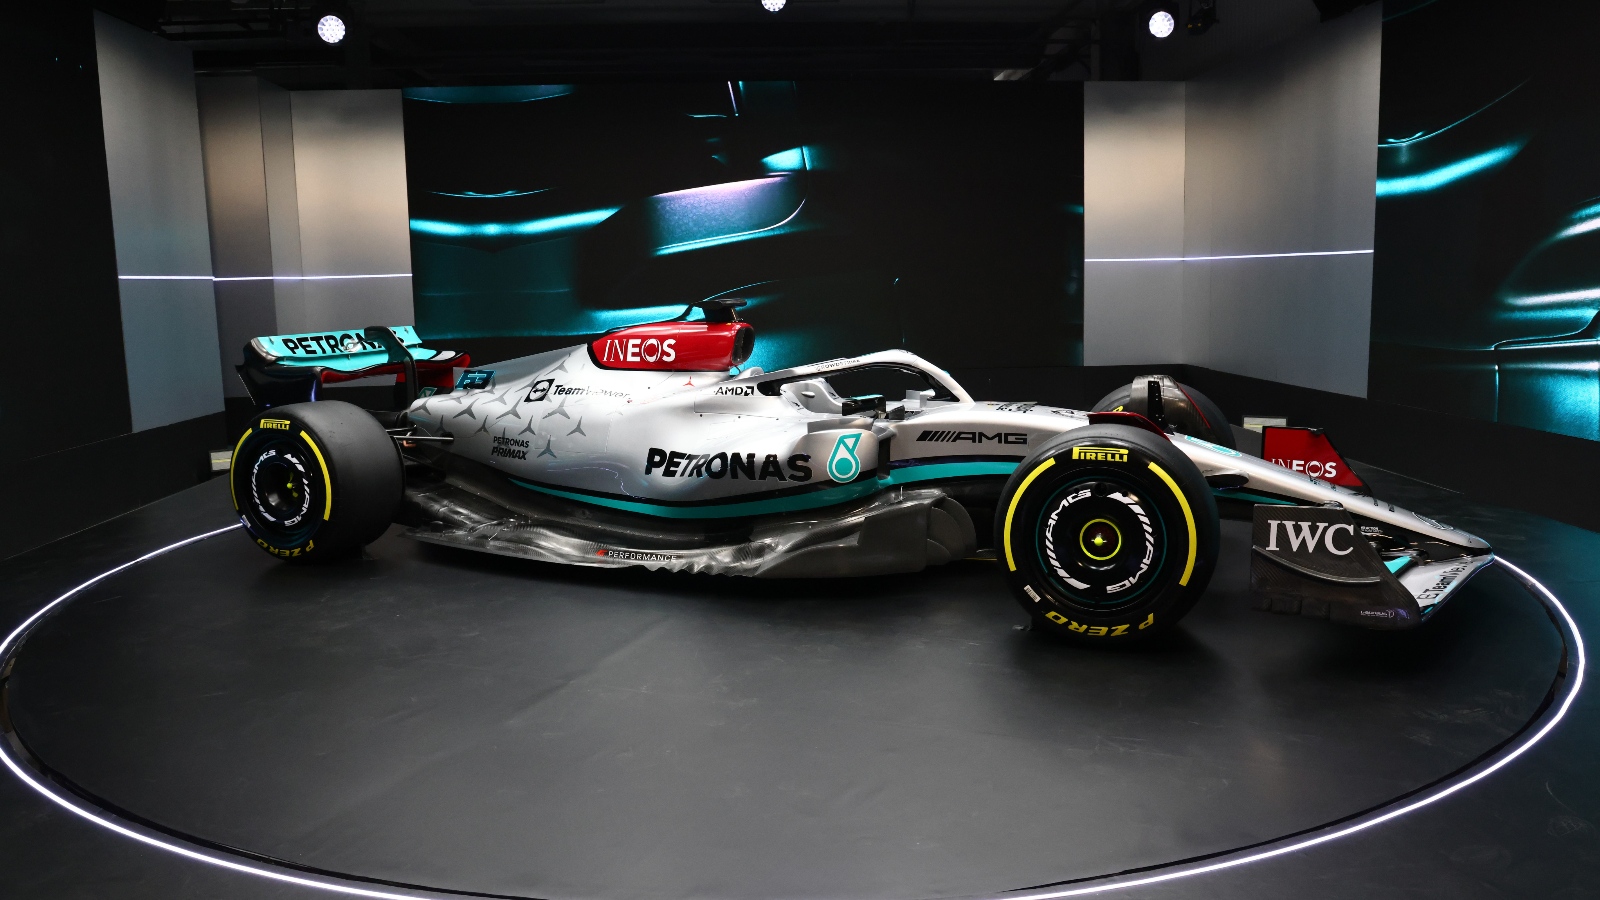 The 2022 Mercedes F1 Car Is a Silver Arrow Once More